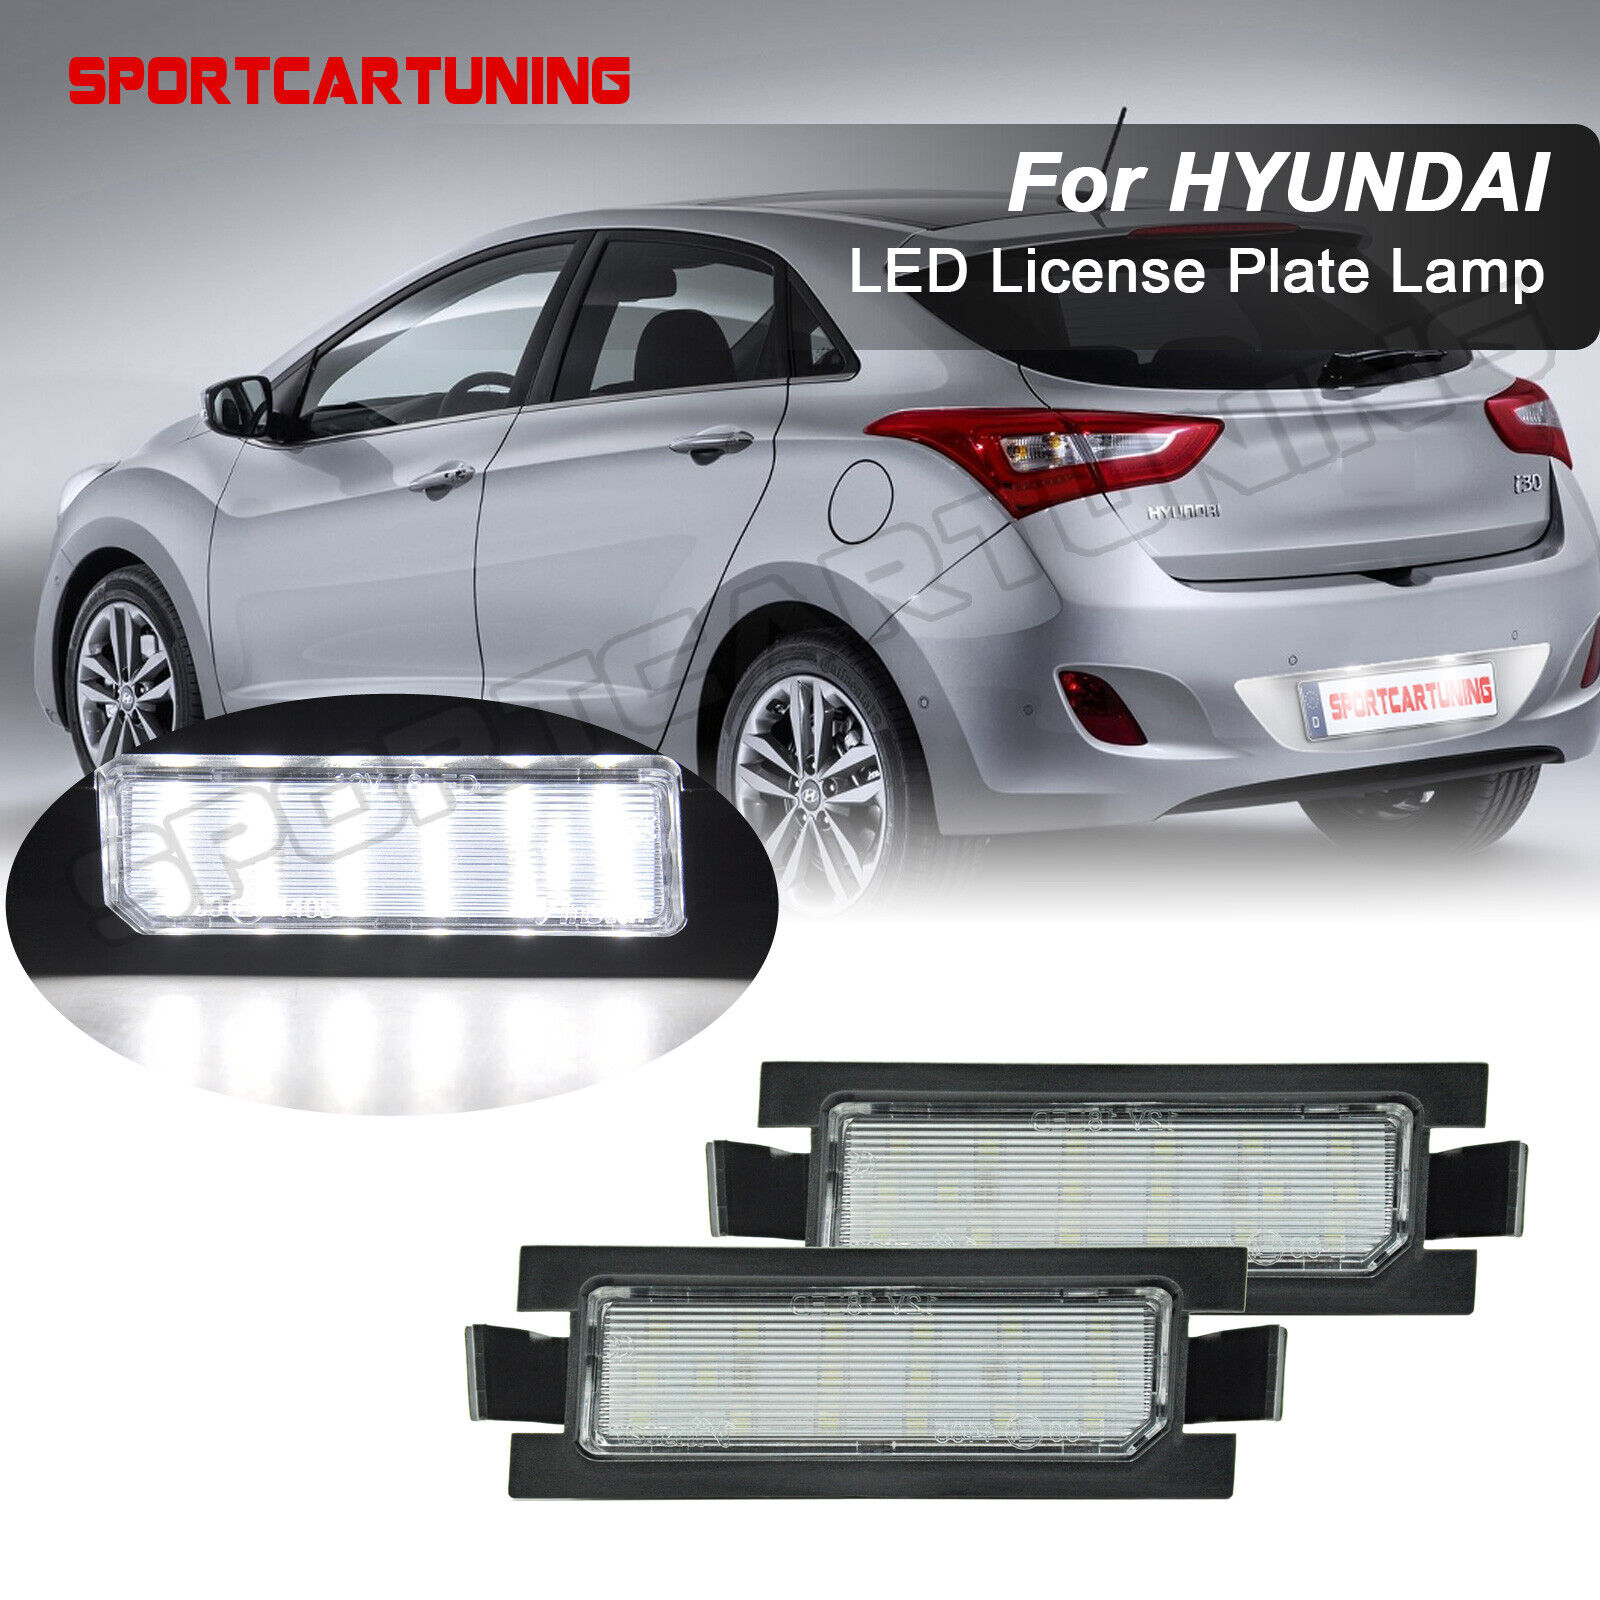 OE-Fit 3W Full LED License Plate Lights For Hyundai I30 Accent Elantra GT 13-17